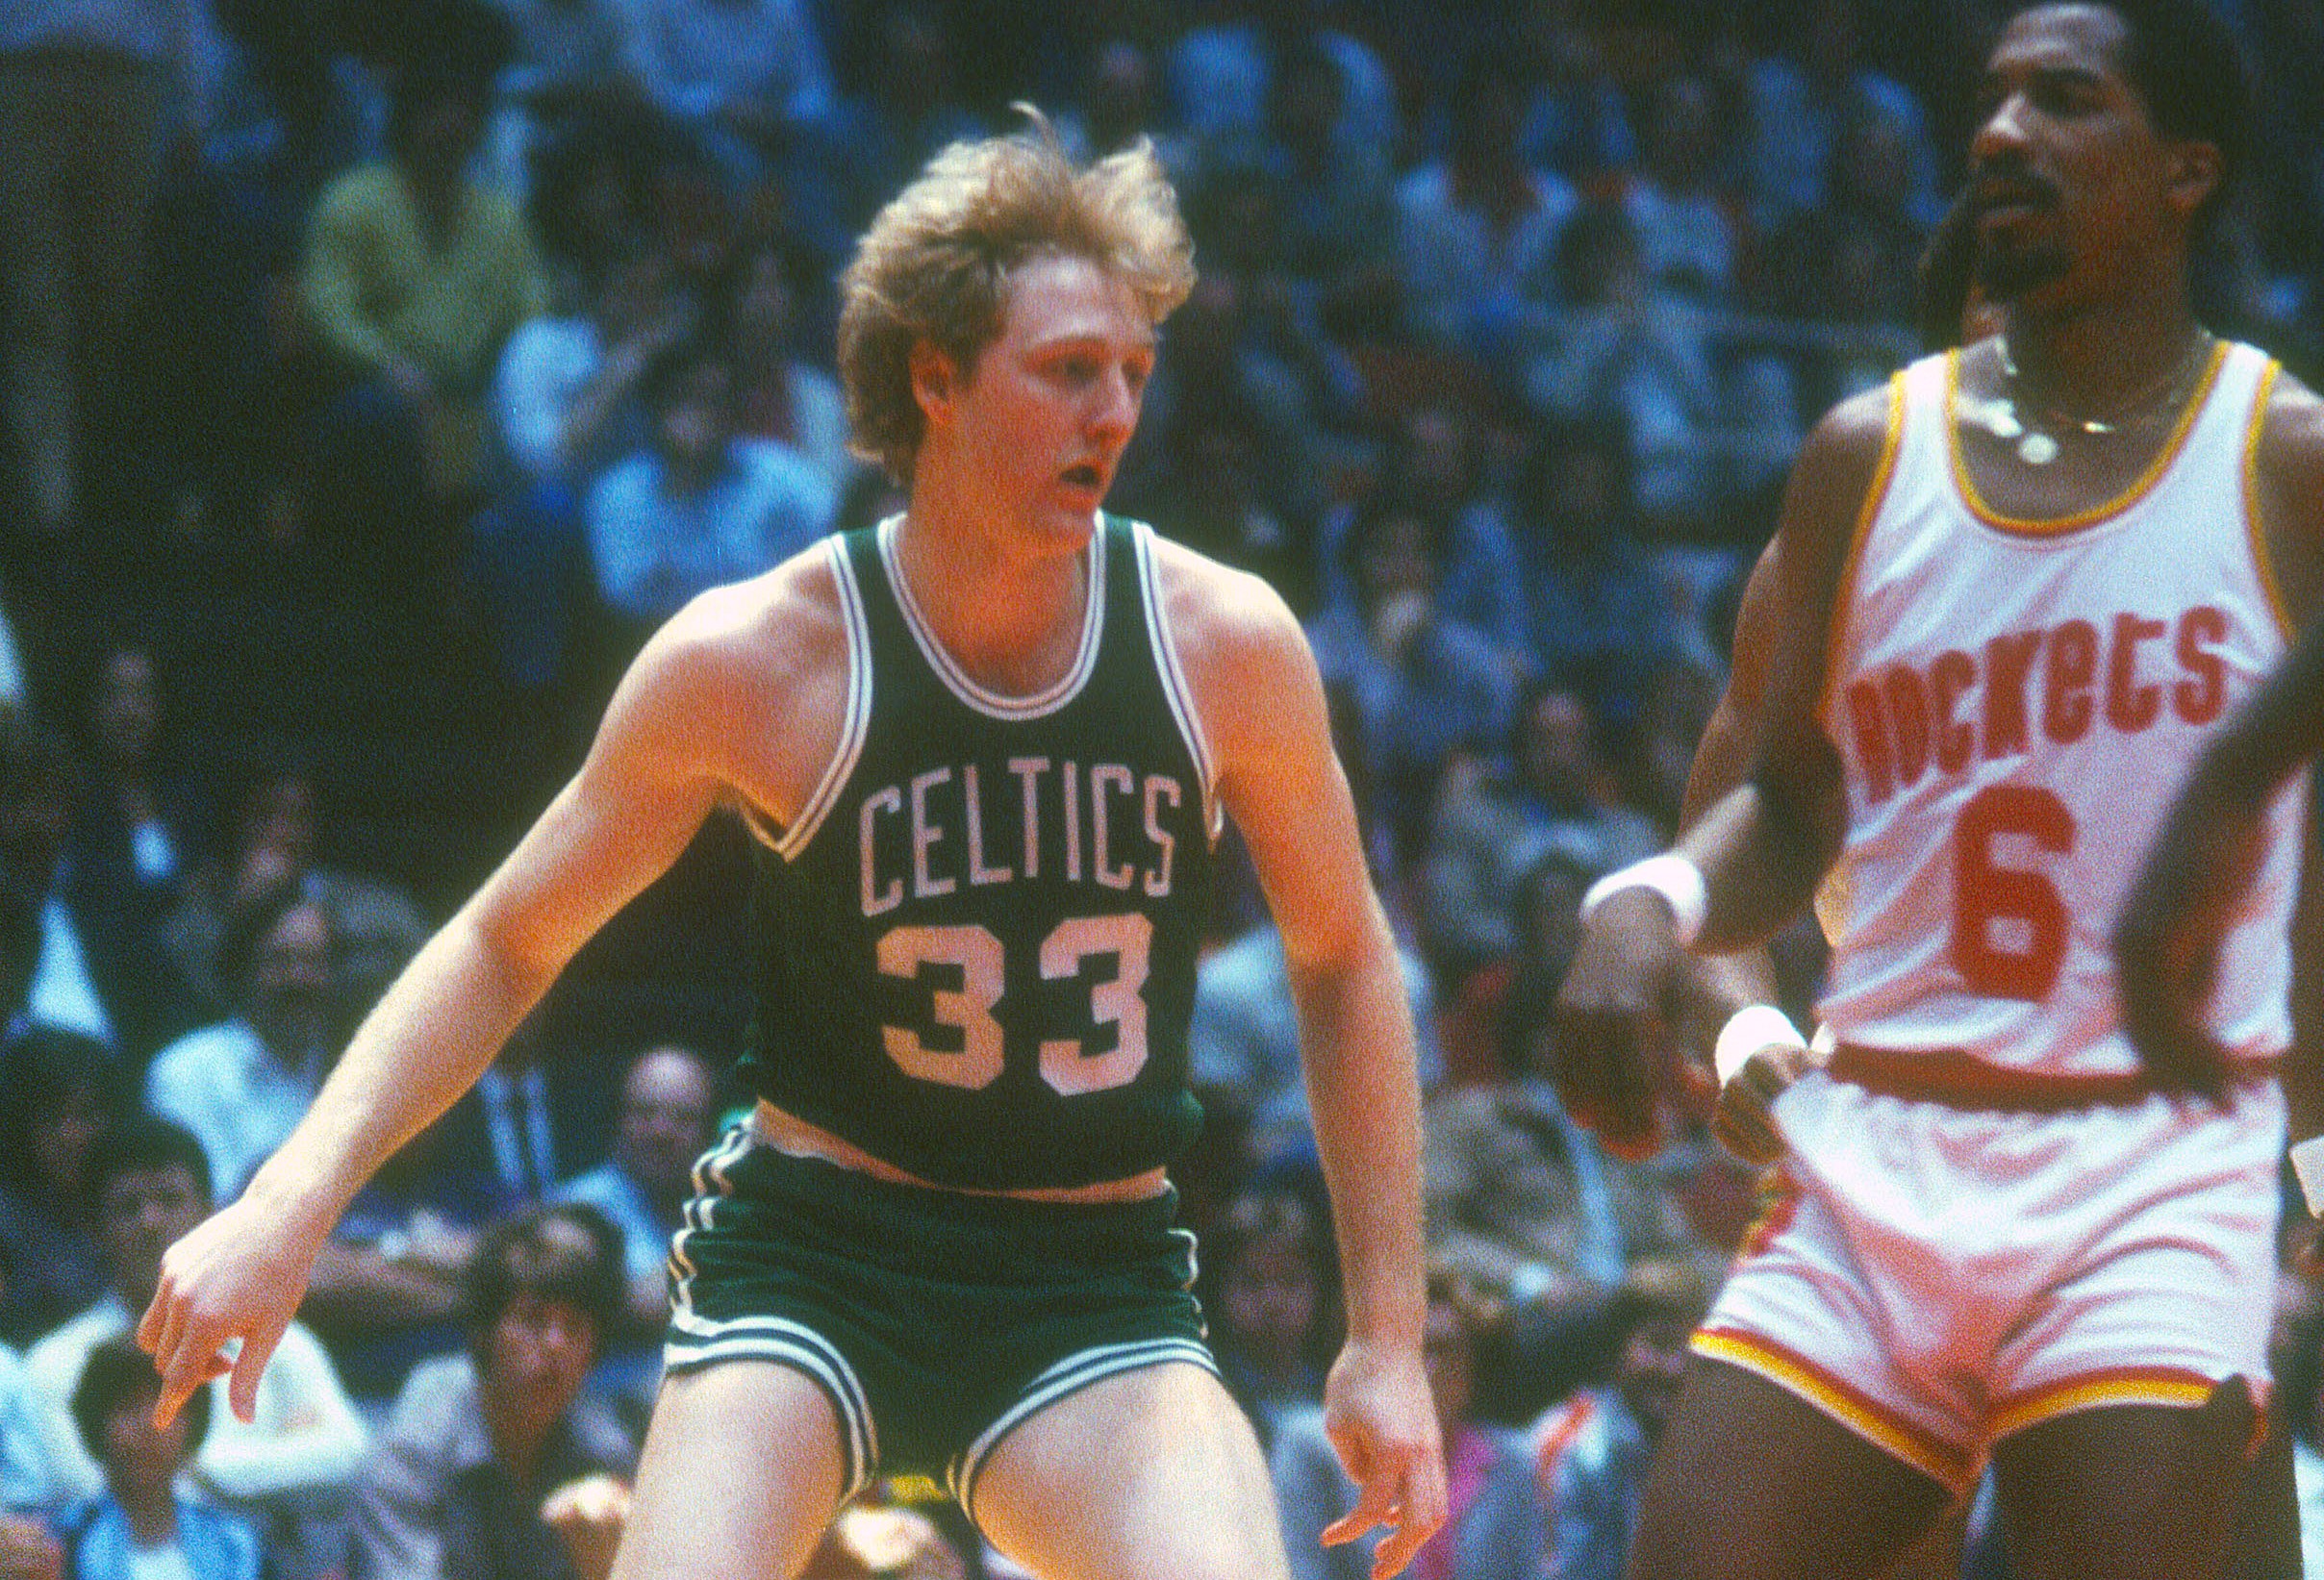 Larry Bird and Bill Russell are a Given, but Who Joins Them on the Mount Rushmore of All-Time Greatest Boston Celtics Players?